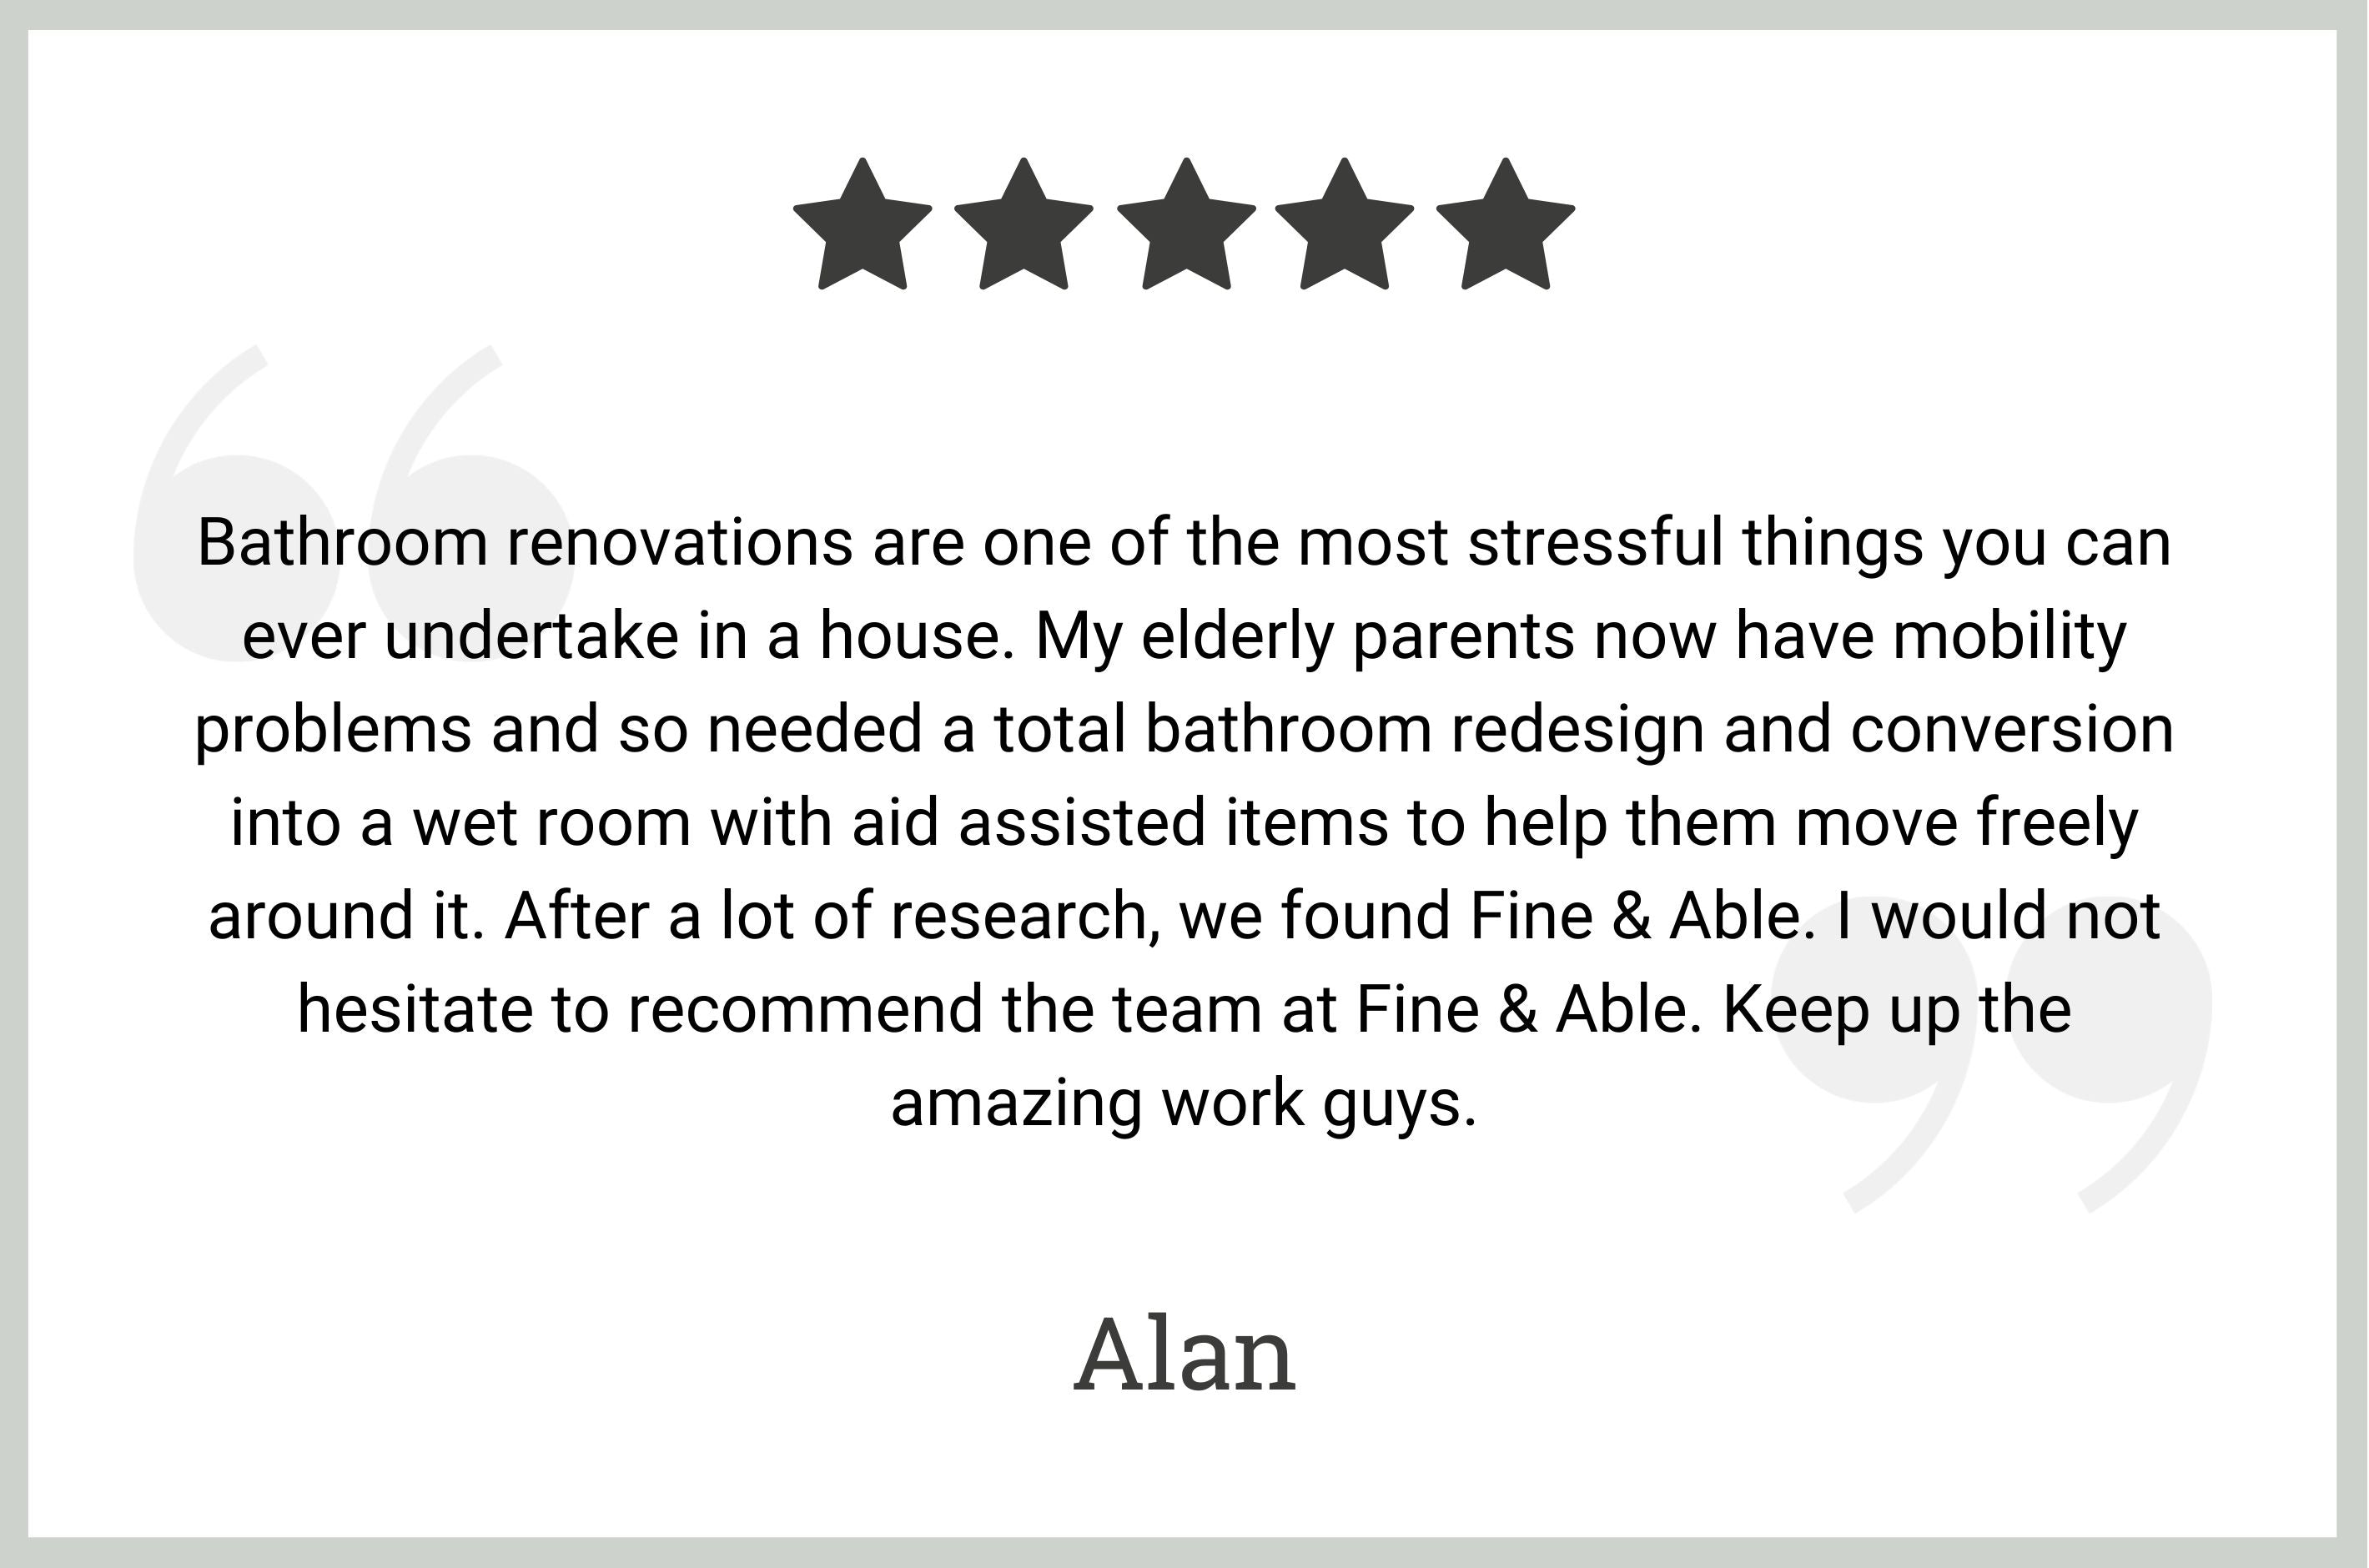 5 star review by Alan